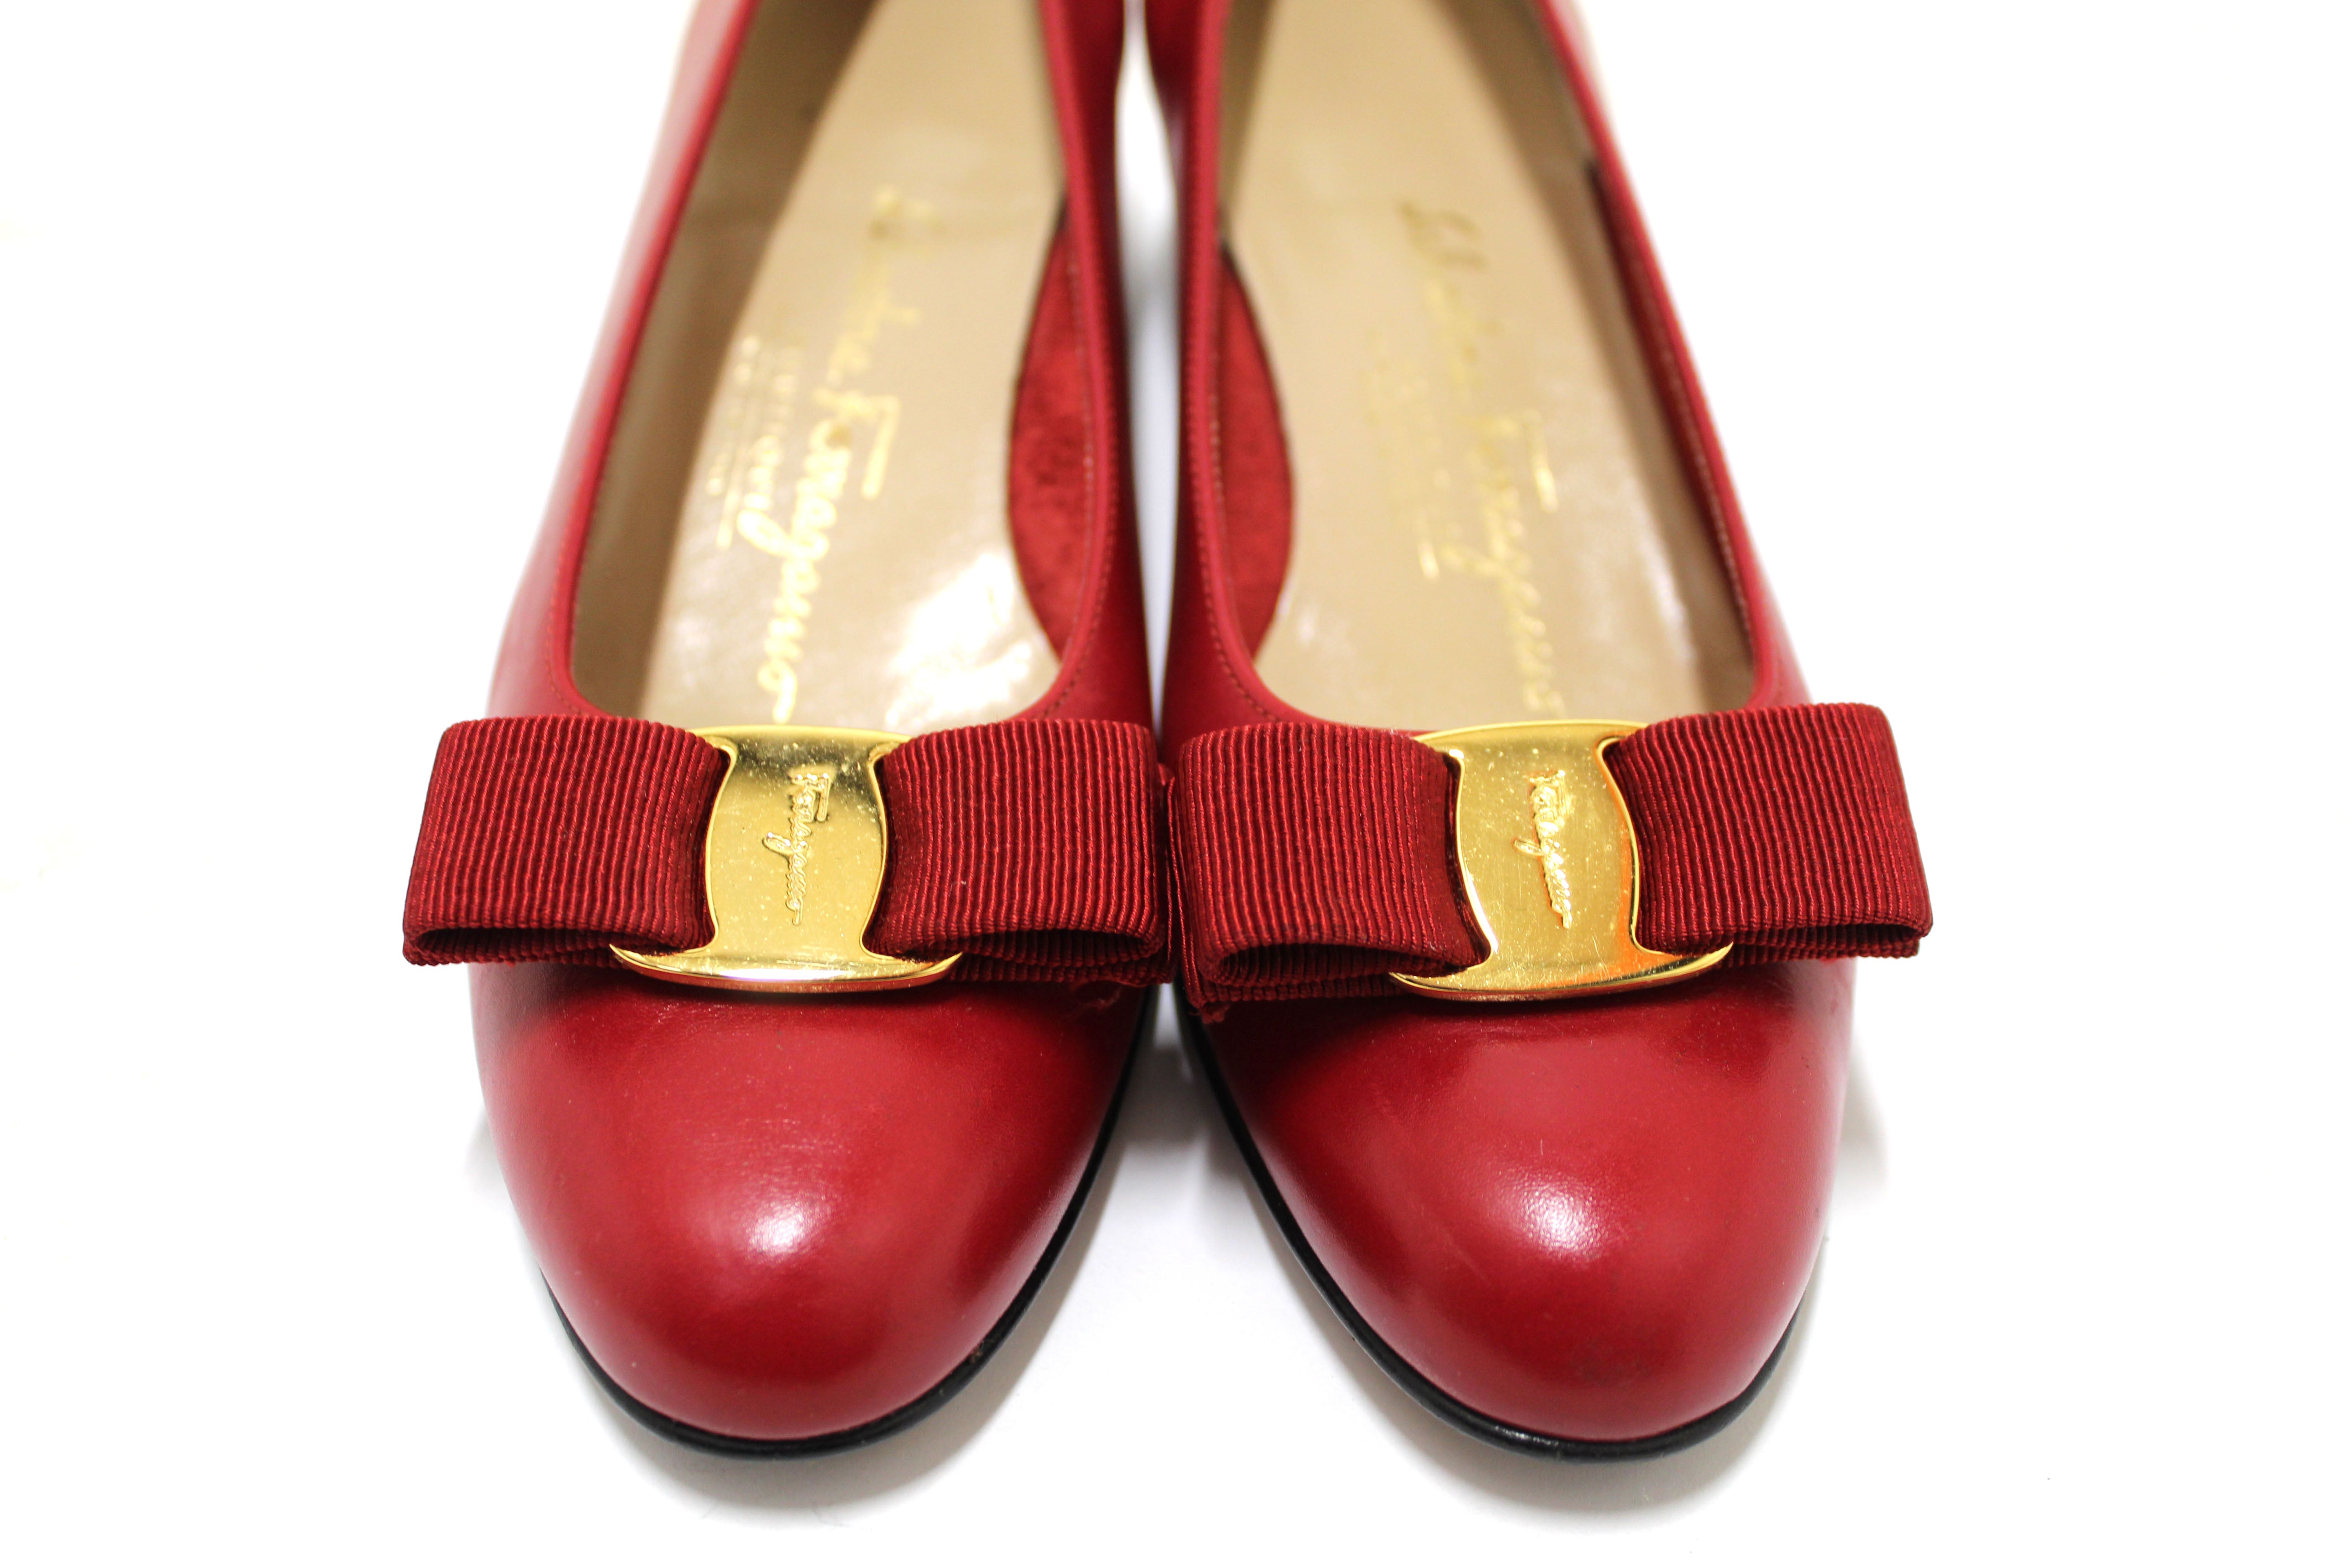 Authentic Salvatore Ferragamo Calfskin Red Leather Kitten Heel with Bow Size 6B